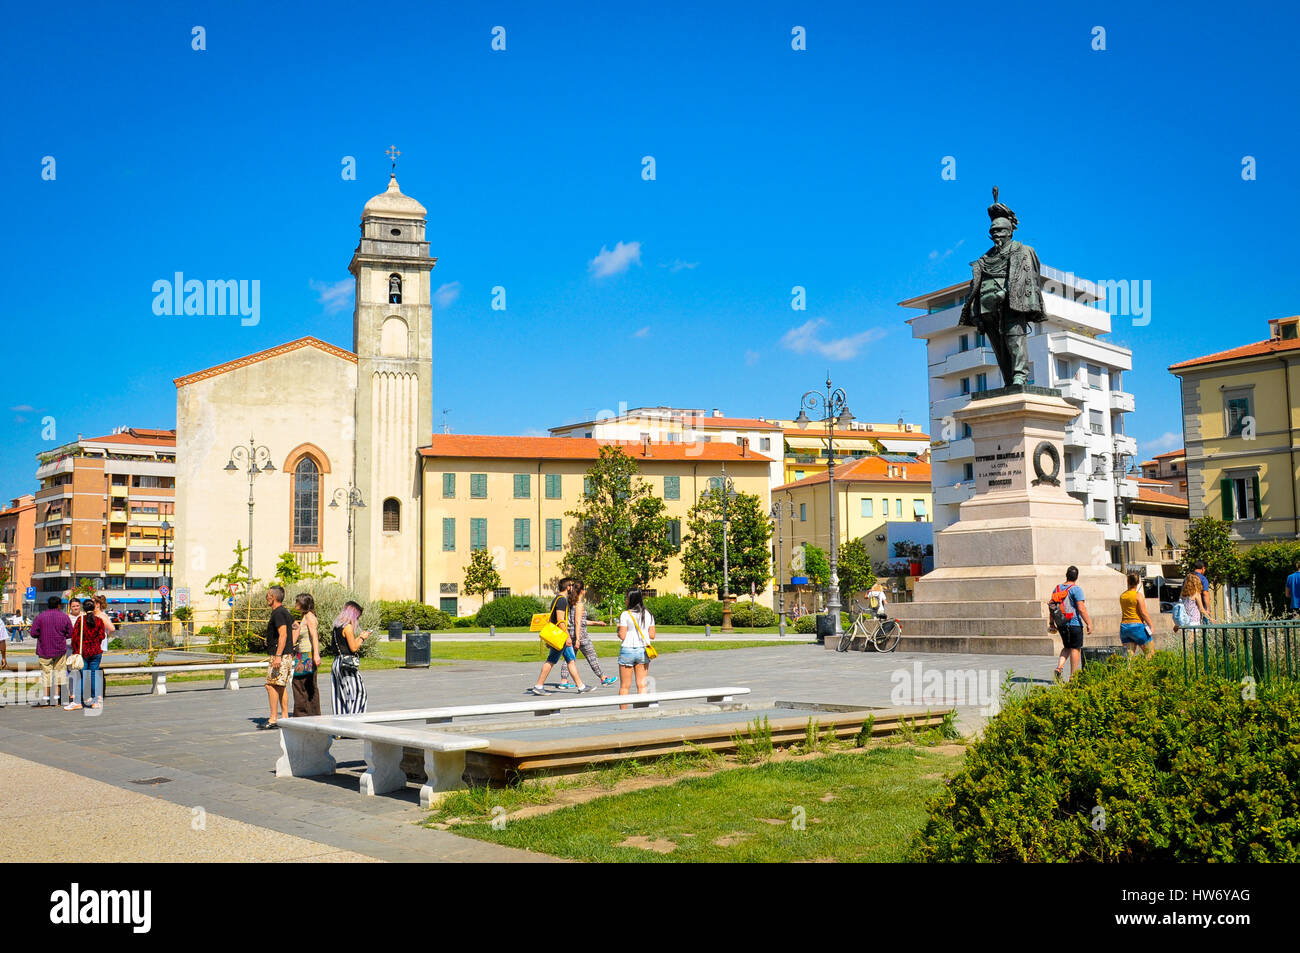 Pisa, Italy - June 25, 2016: Tourists visit the old town in Pisa, Italy reknown for its leaning tower. Stock Photo